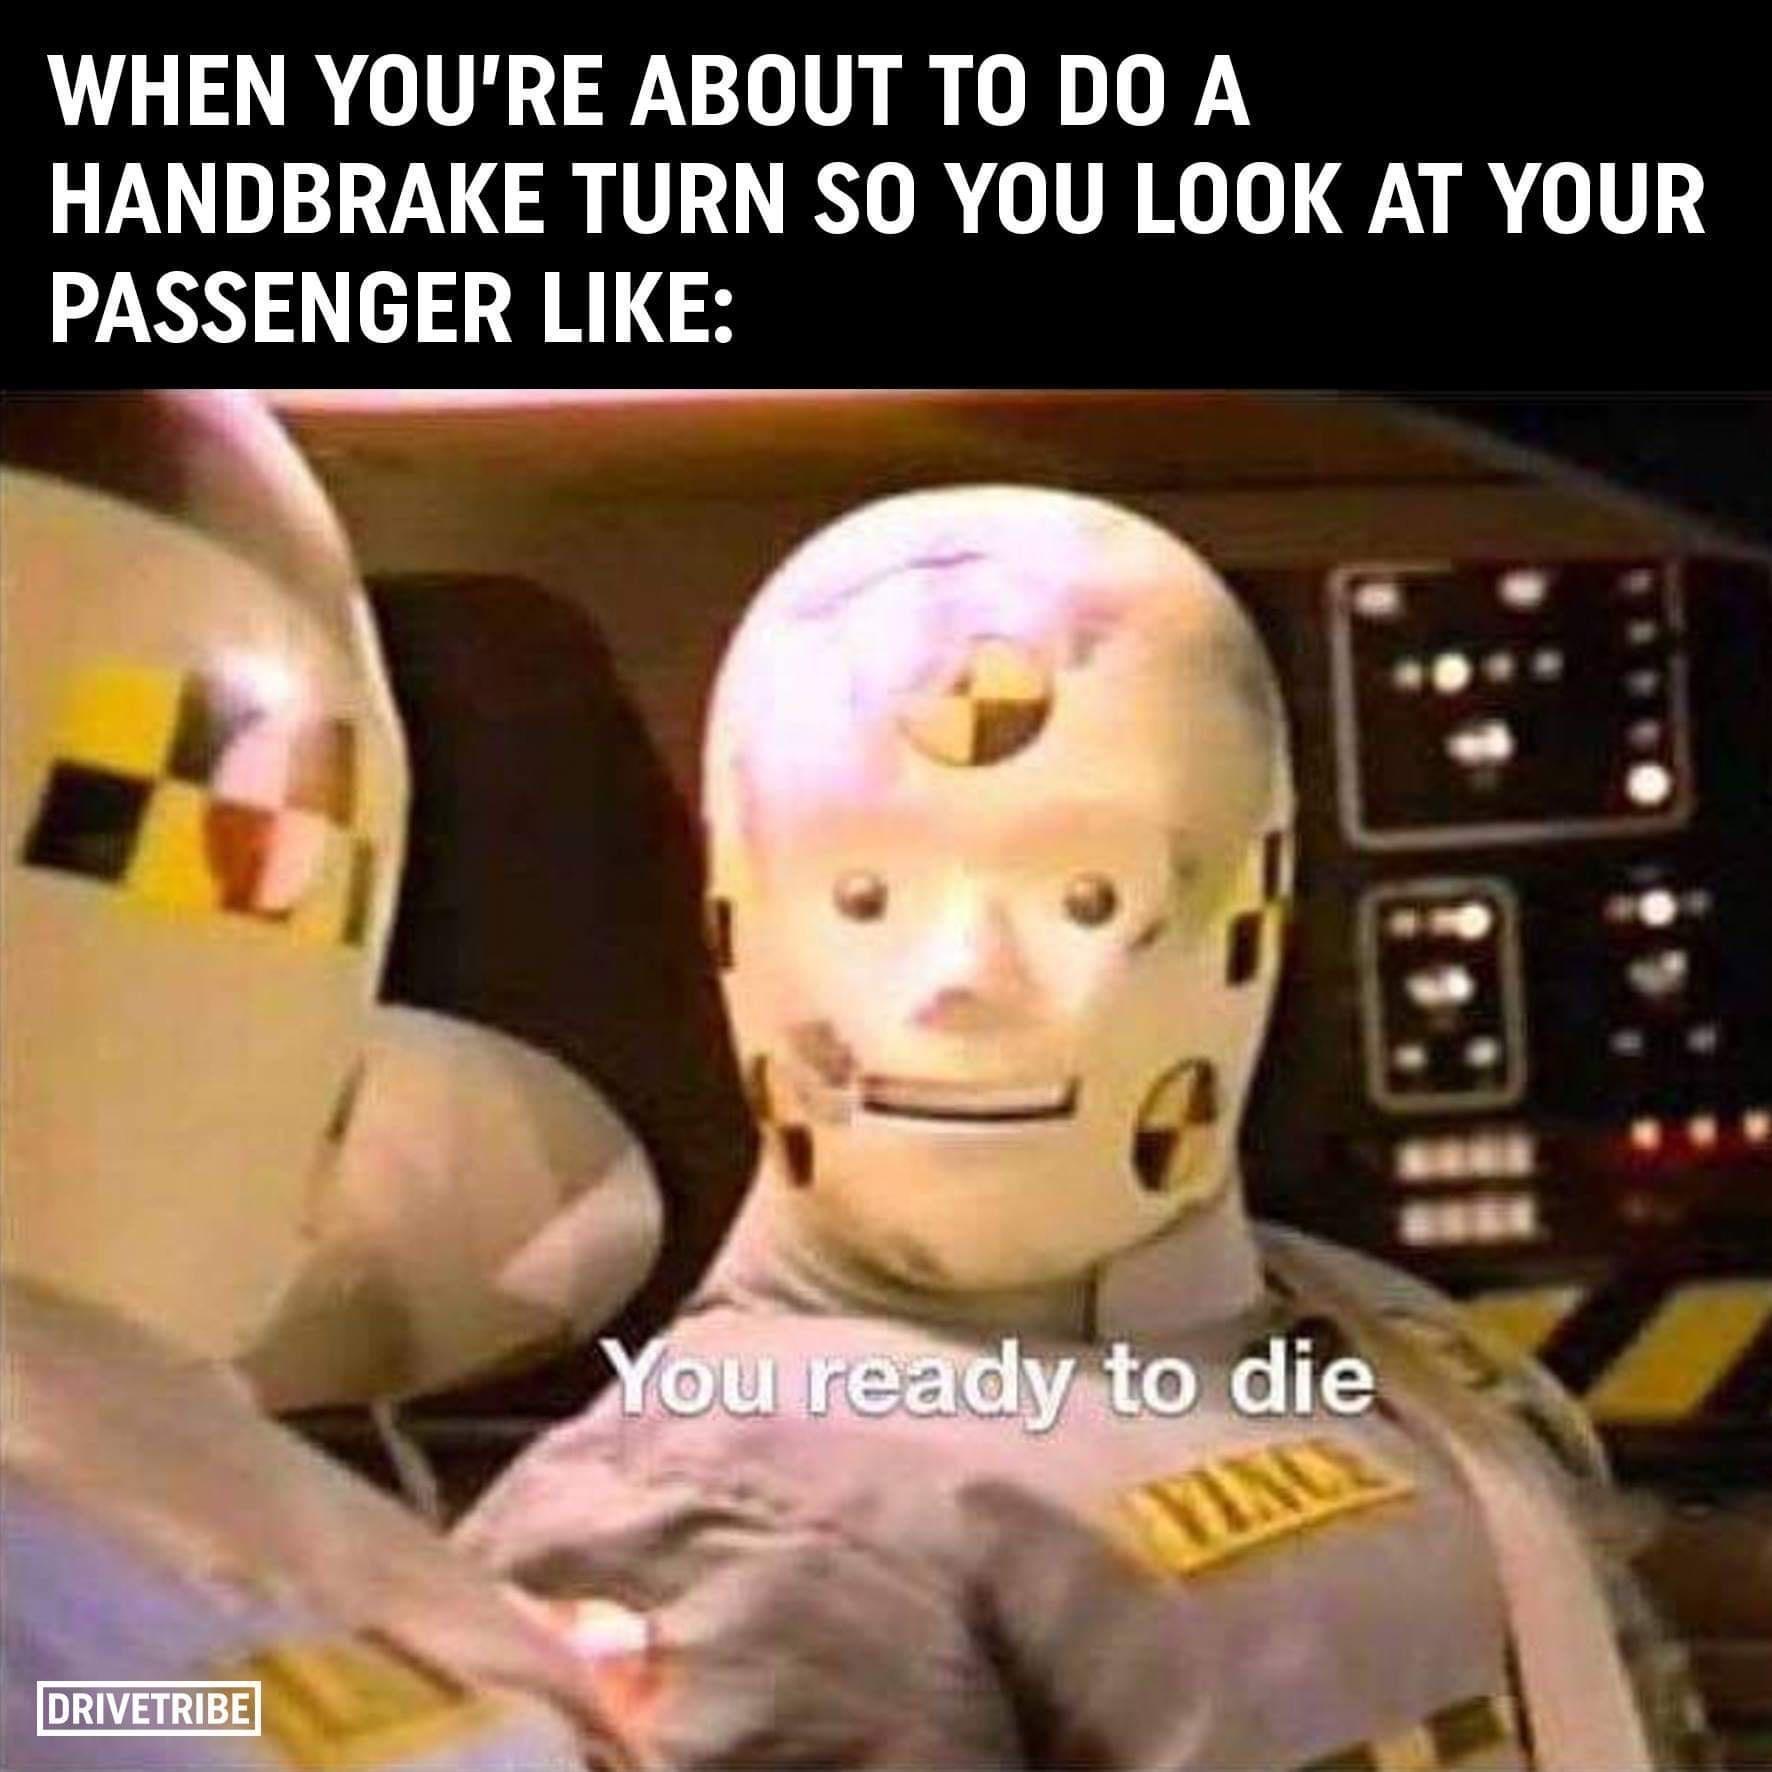 funny memes pics and tweets - handbrake memes - When You'Re About To Do A Handbrake Turn So You Look At Your Passenger Drivetribe You ready to die Yin